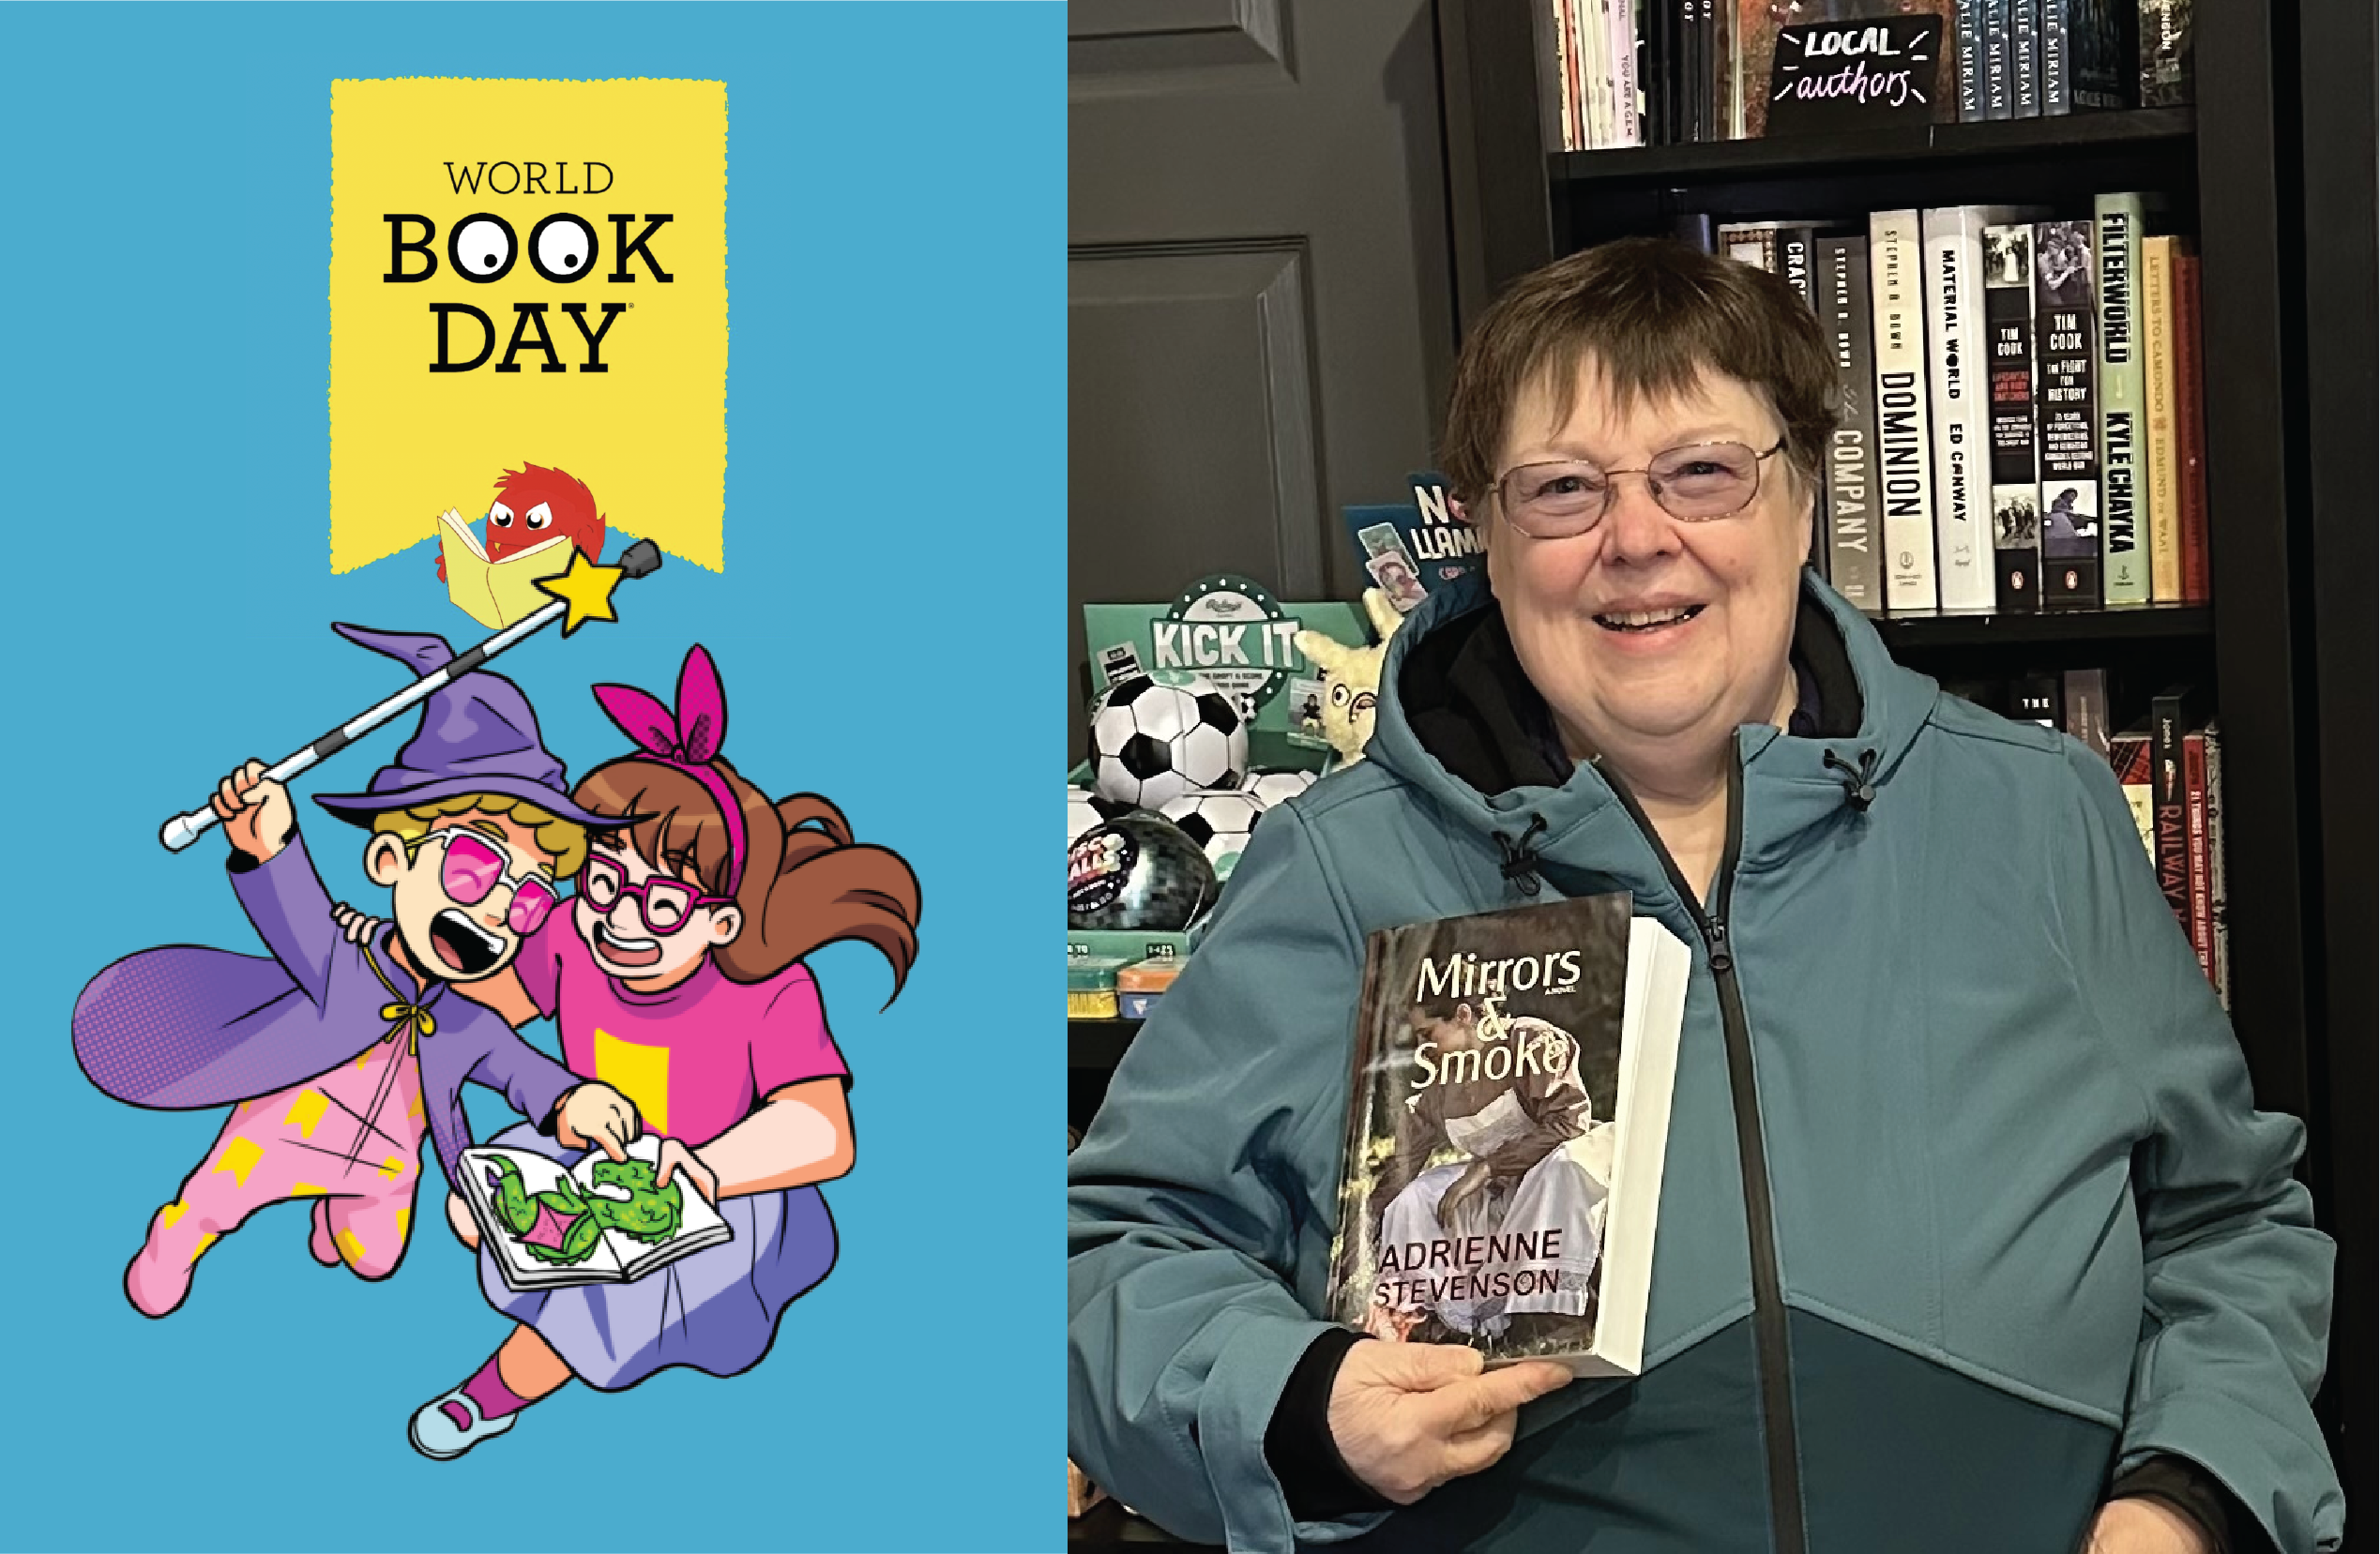 Woman holding her book in front of bookshelves and a comic-like graphic for World Book Day